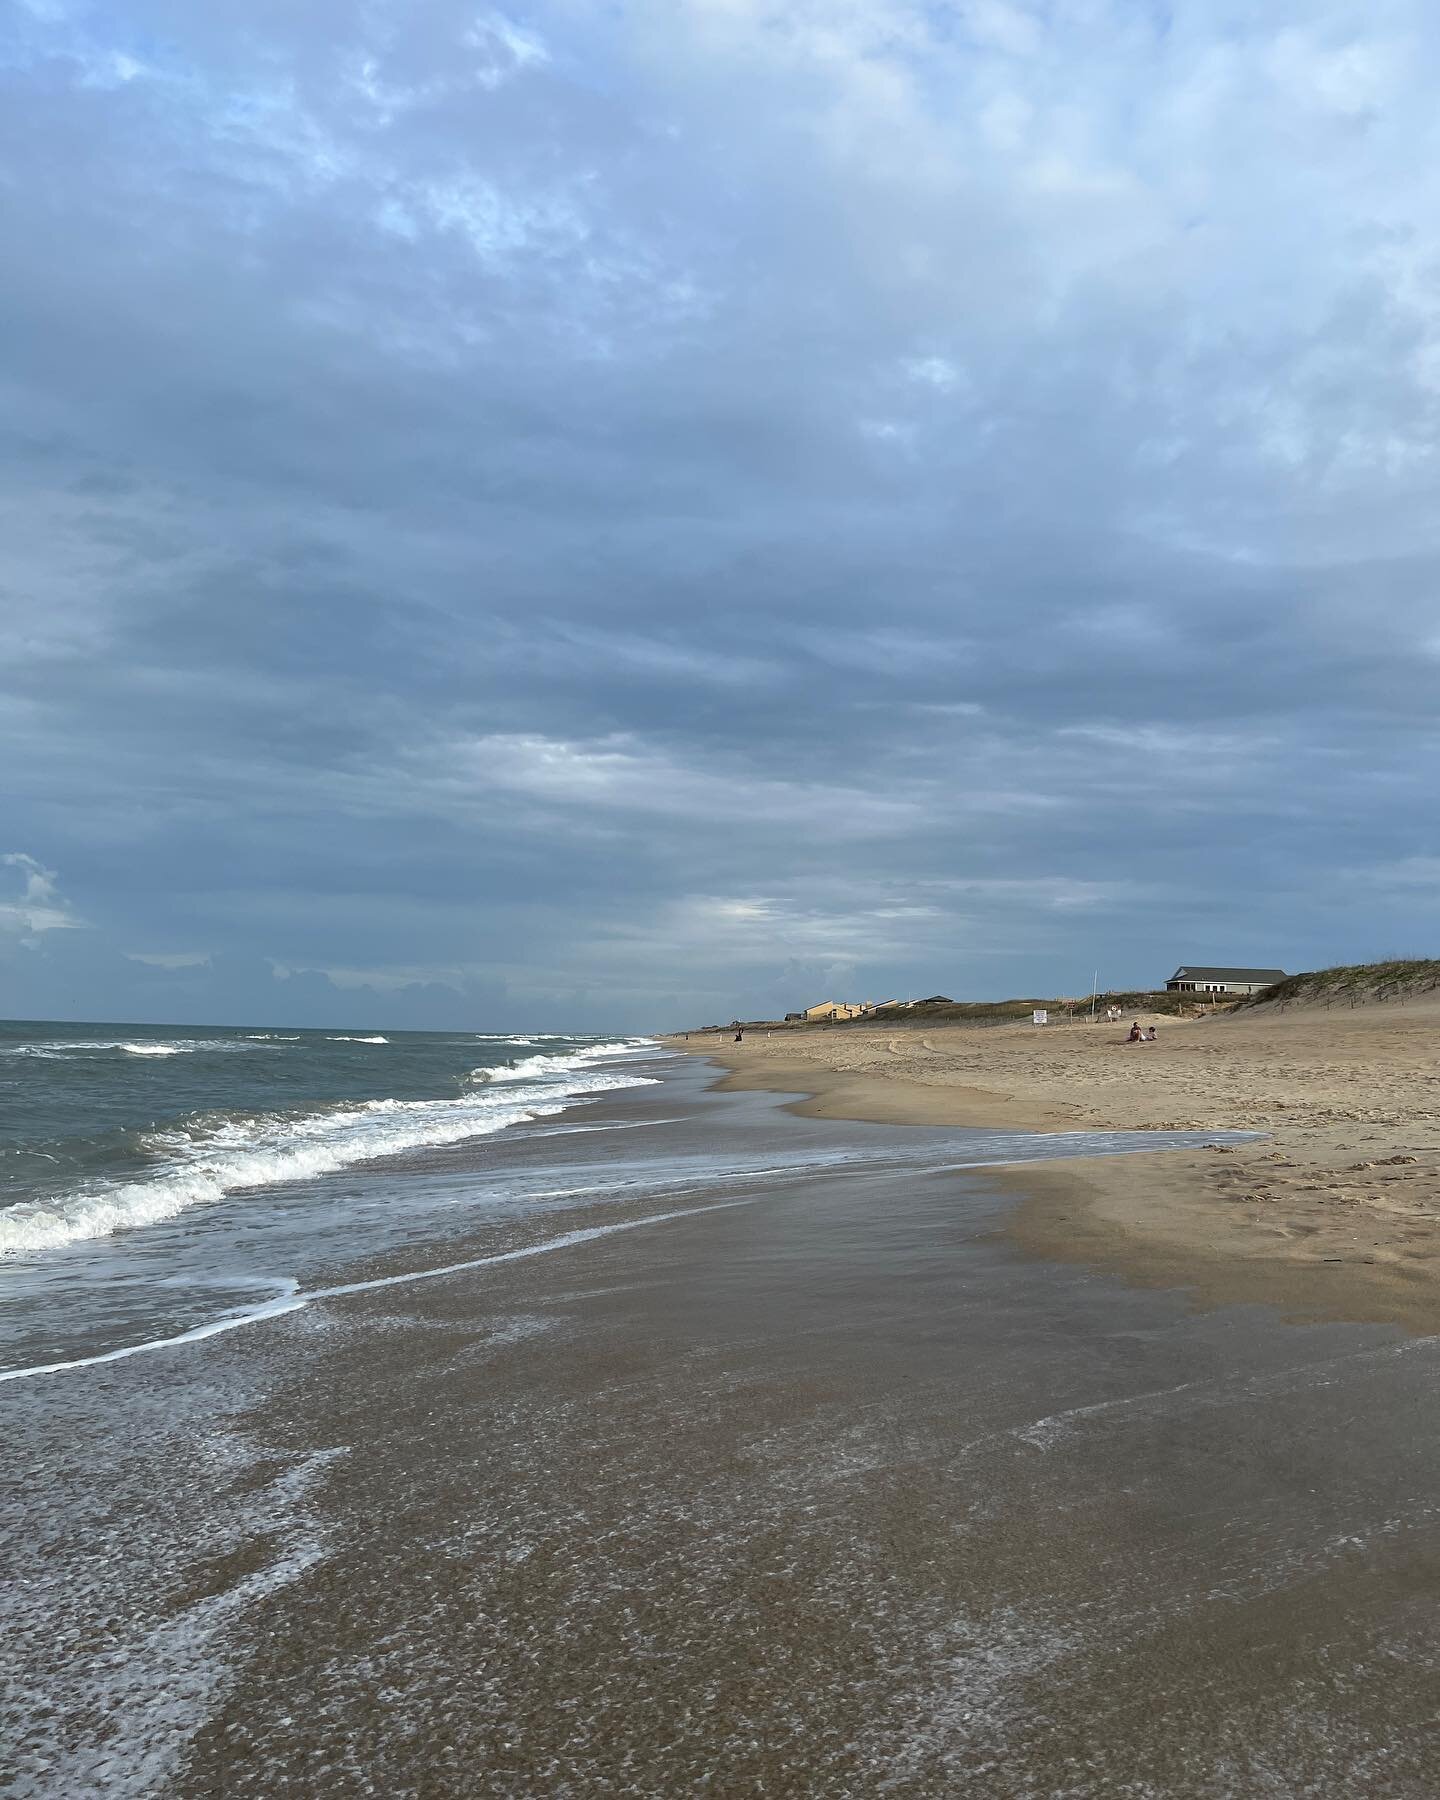 When you have explored almost every part of New England you want to visit it&rsquo;s time to go someplace new.  We are spending the week in the Outer Banks. Make sure you follow my stories for what we are doing. #obx #outerbanksnc #aprilvacation #fam